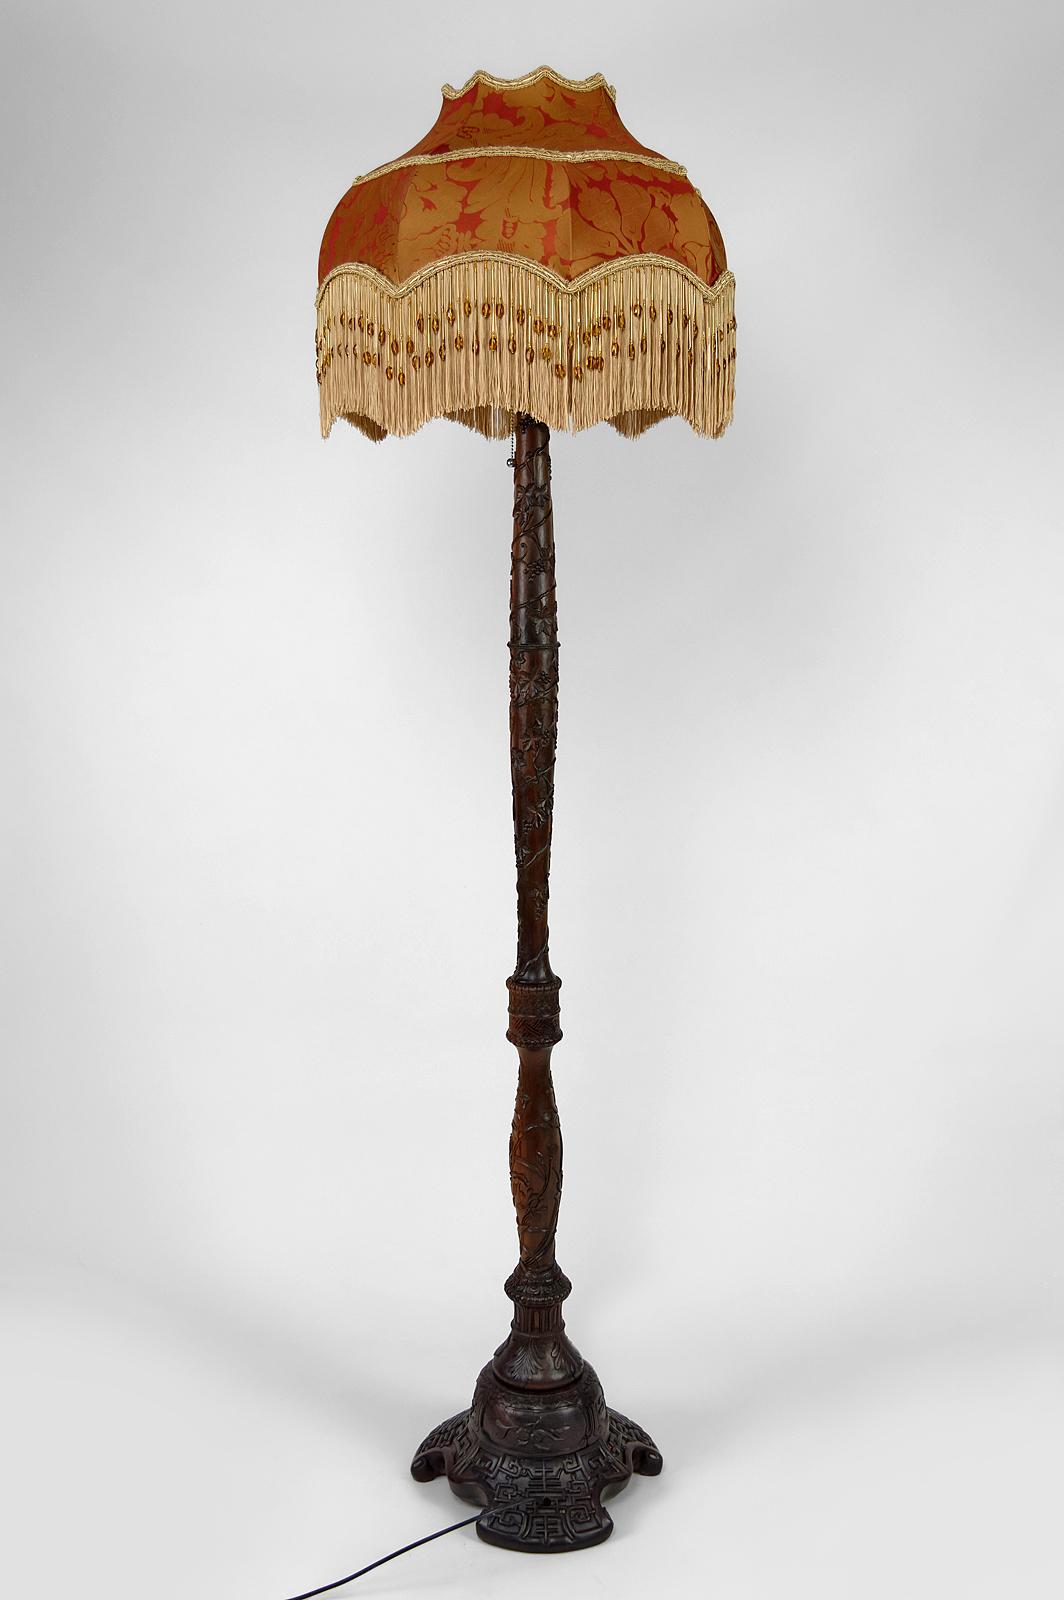 Chinese Export Antique Asian carved wooden floor lamp, Indochina or China, circa 1900